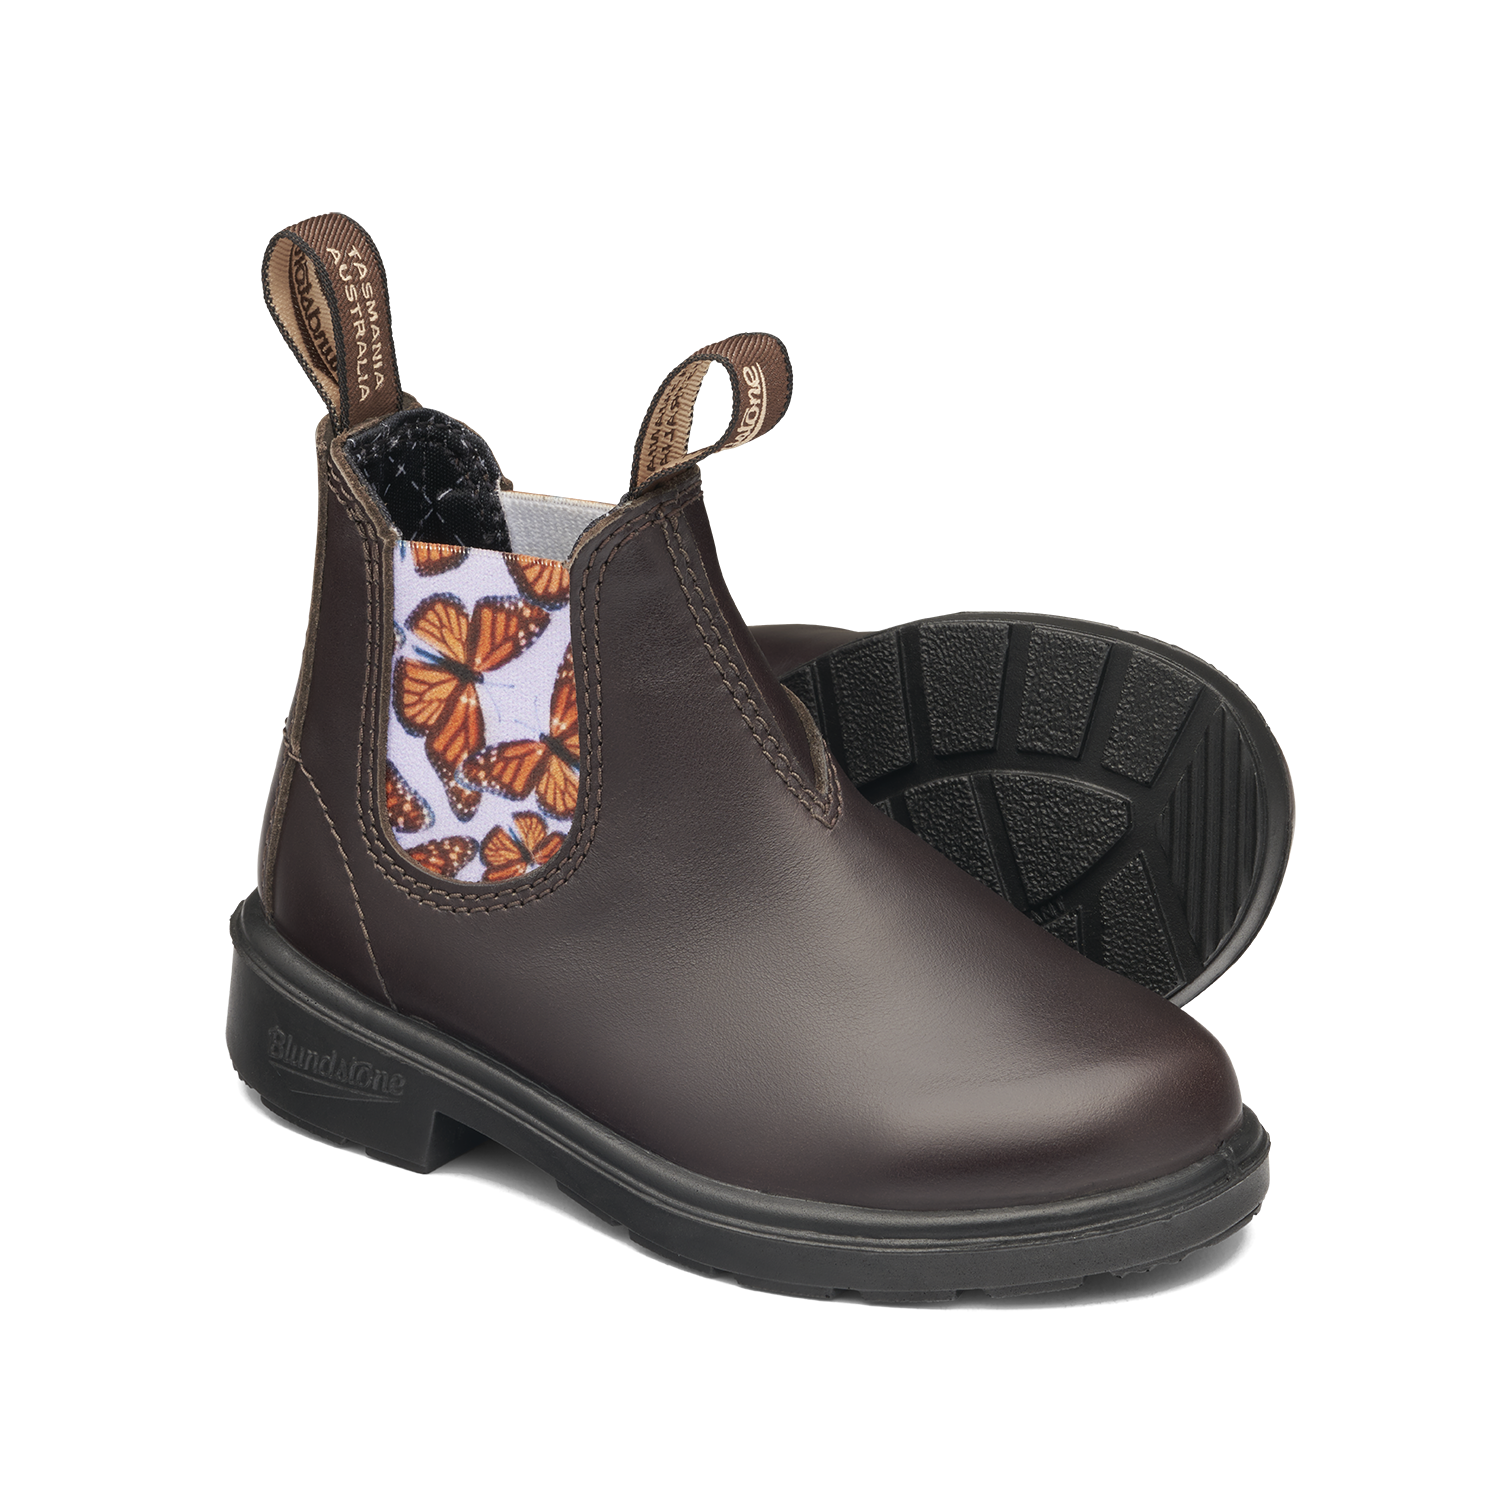 Blundstone 2395 Kids Brown with Butterfly Lilac Elastic